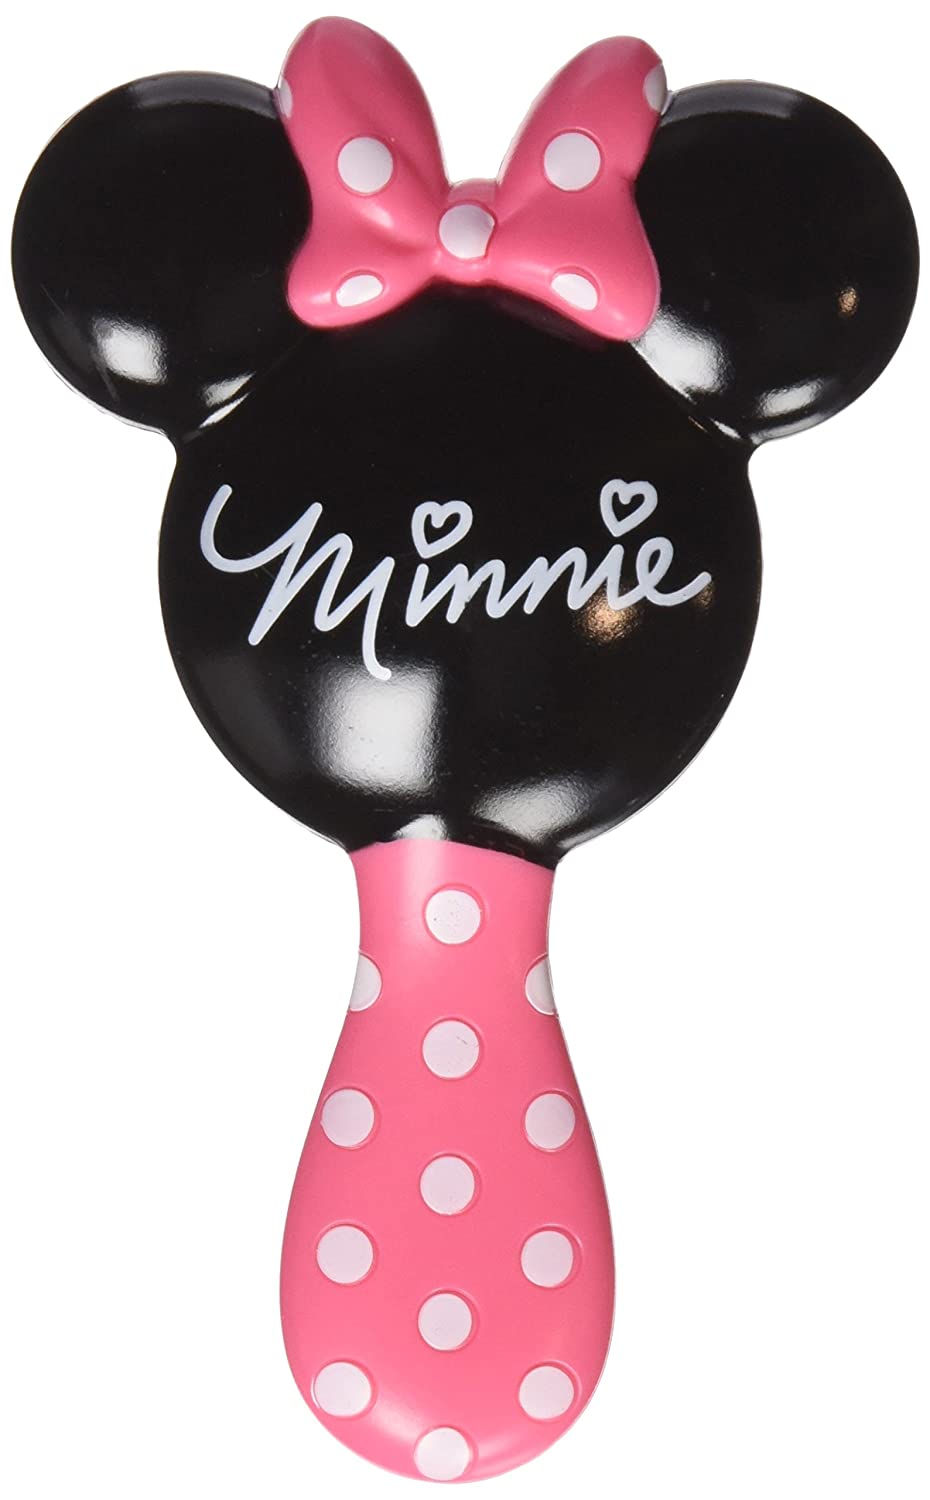 Disney Baby Minnie Hair Brush and Wide Tooth Comb Set - With Easy Grip Handles